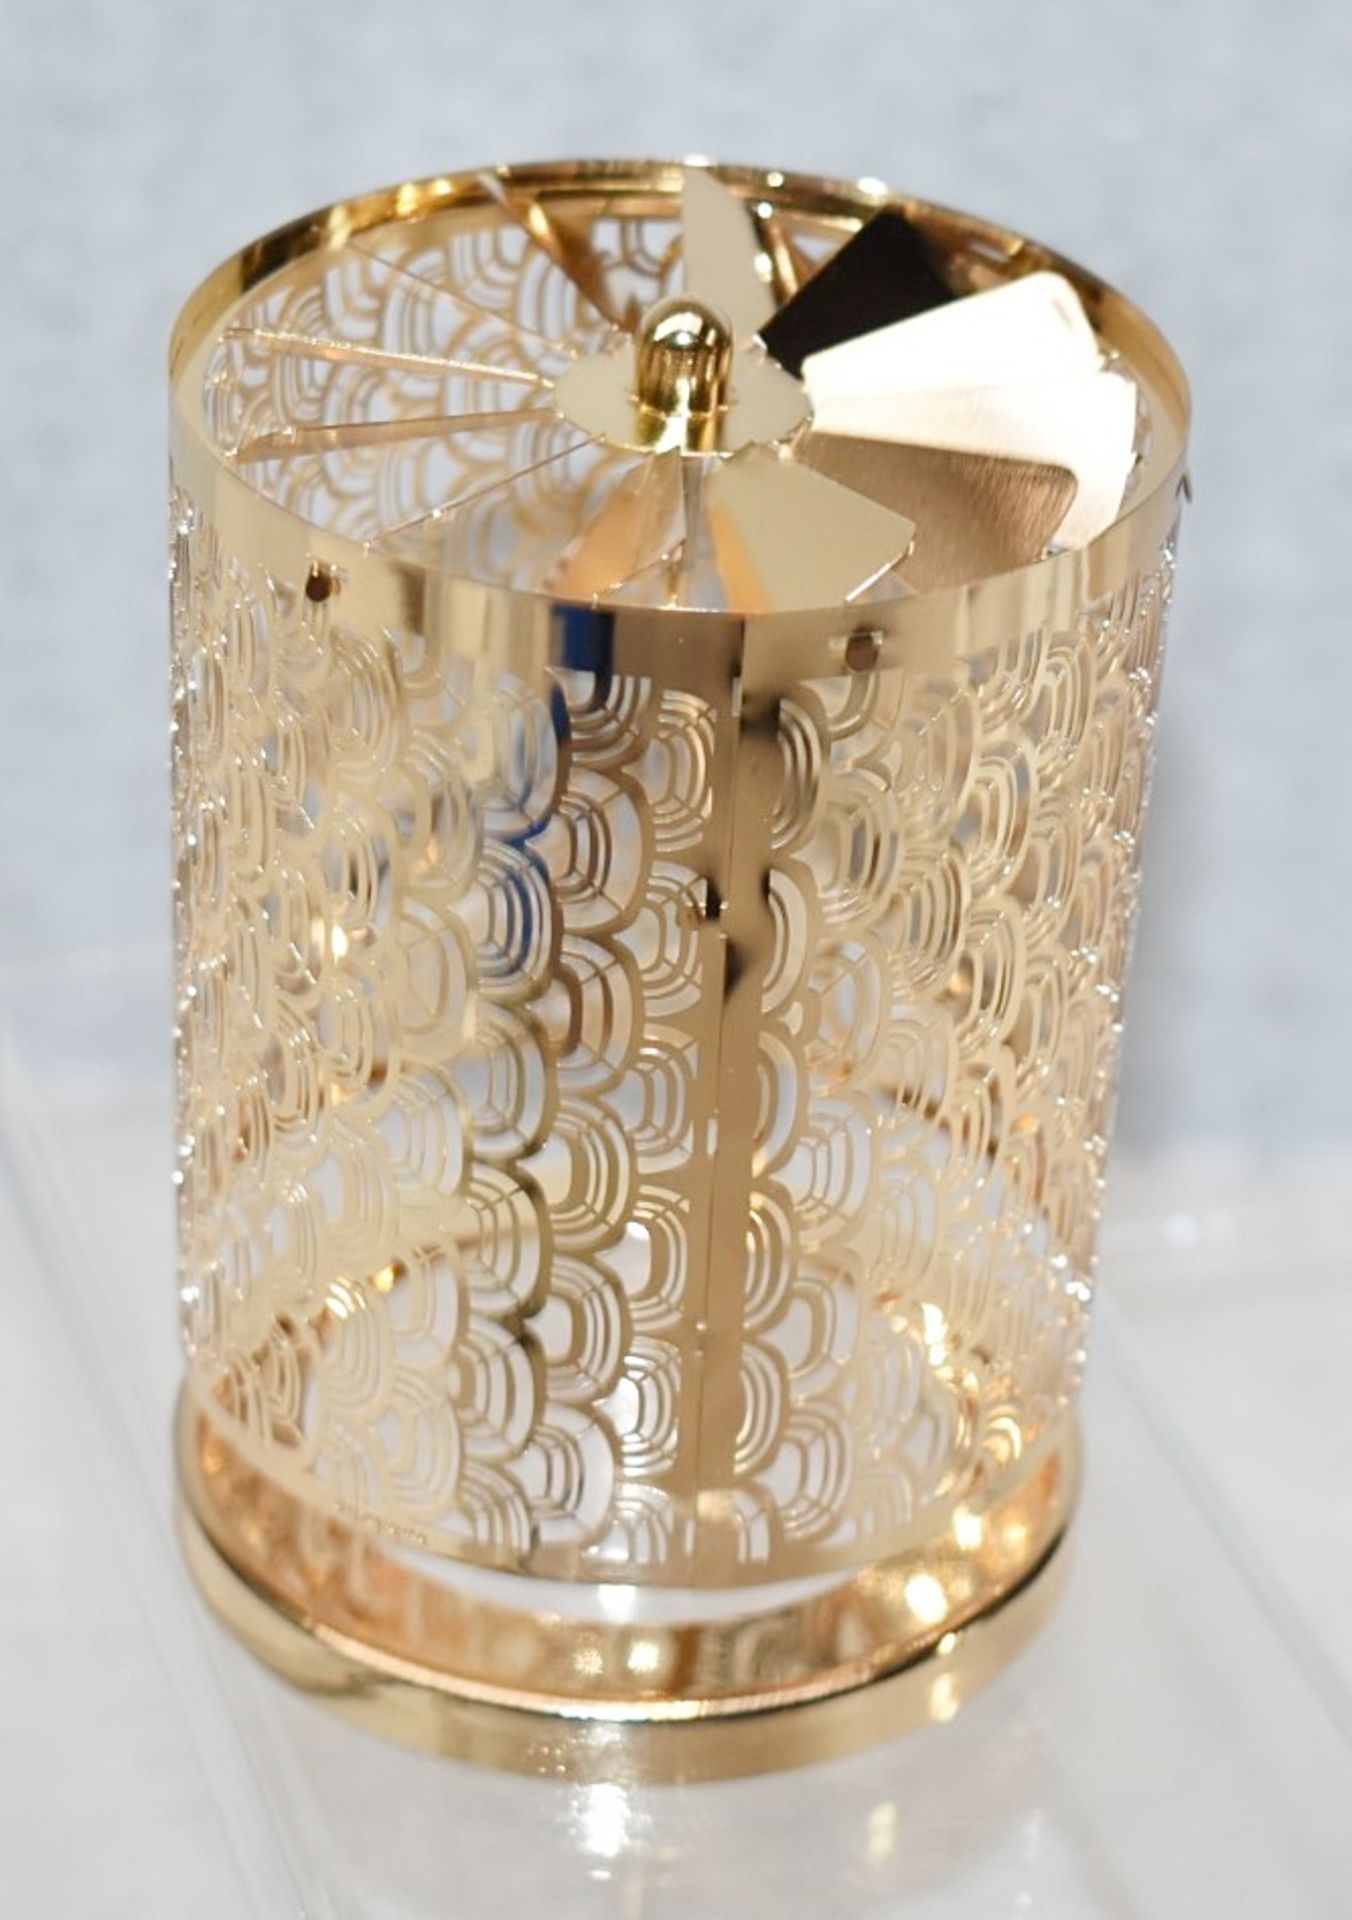 1 x DIPTYQUE Le Redouté Candle Mounted Lantern - Original Price £73.00 - Unused Boxed Stock - Ref: